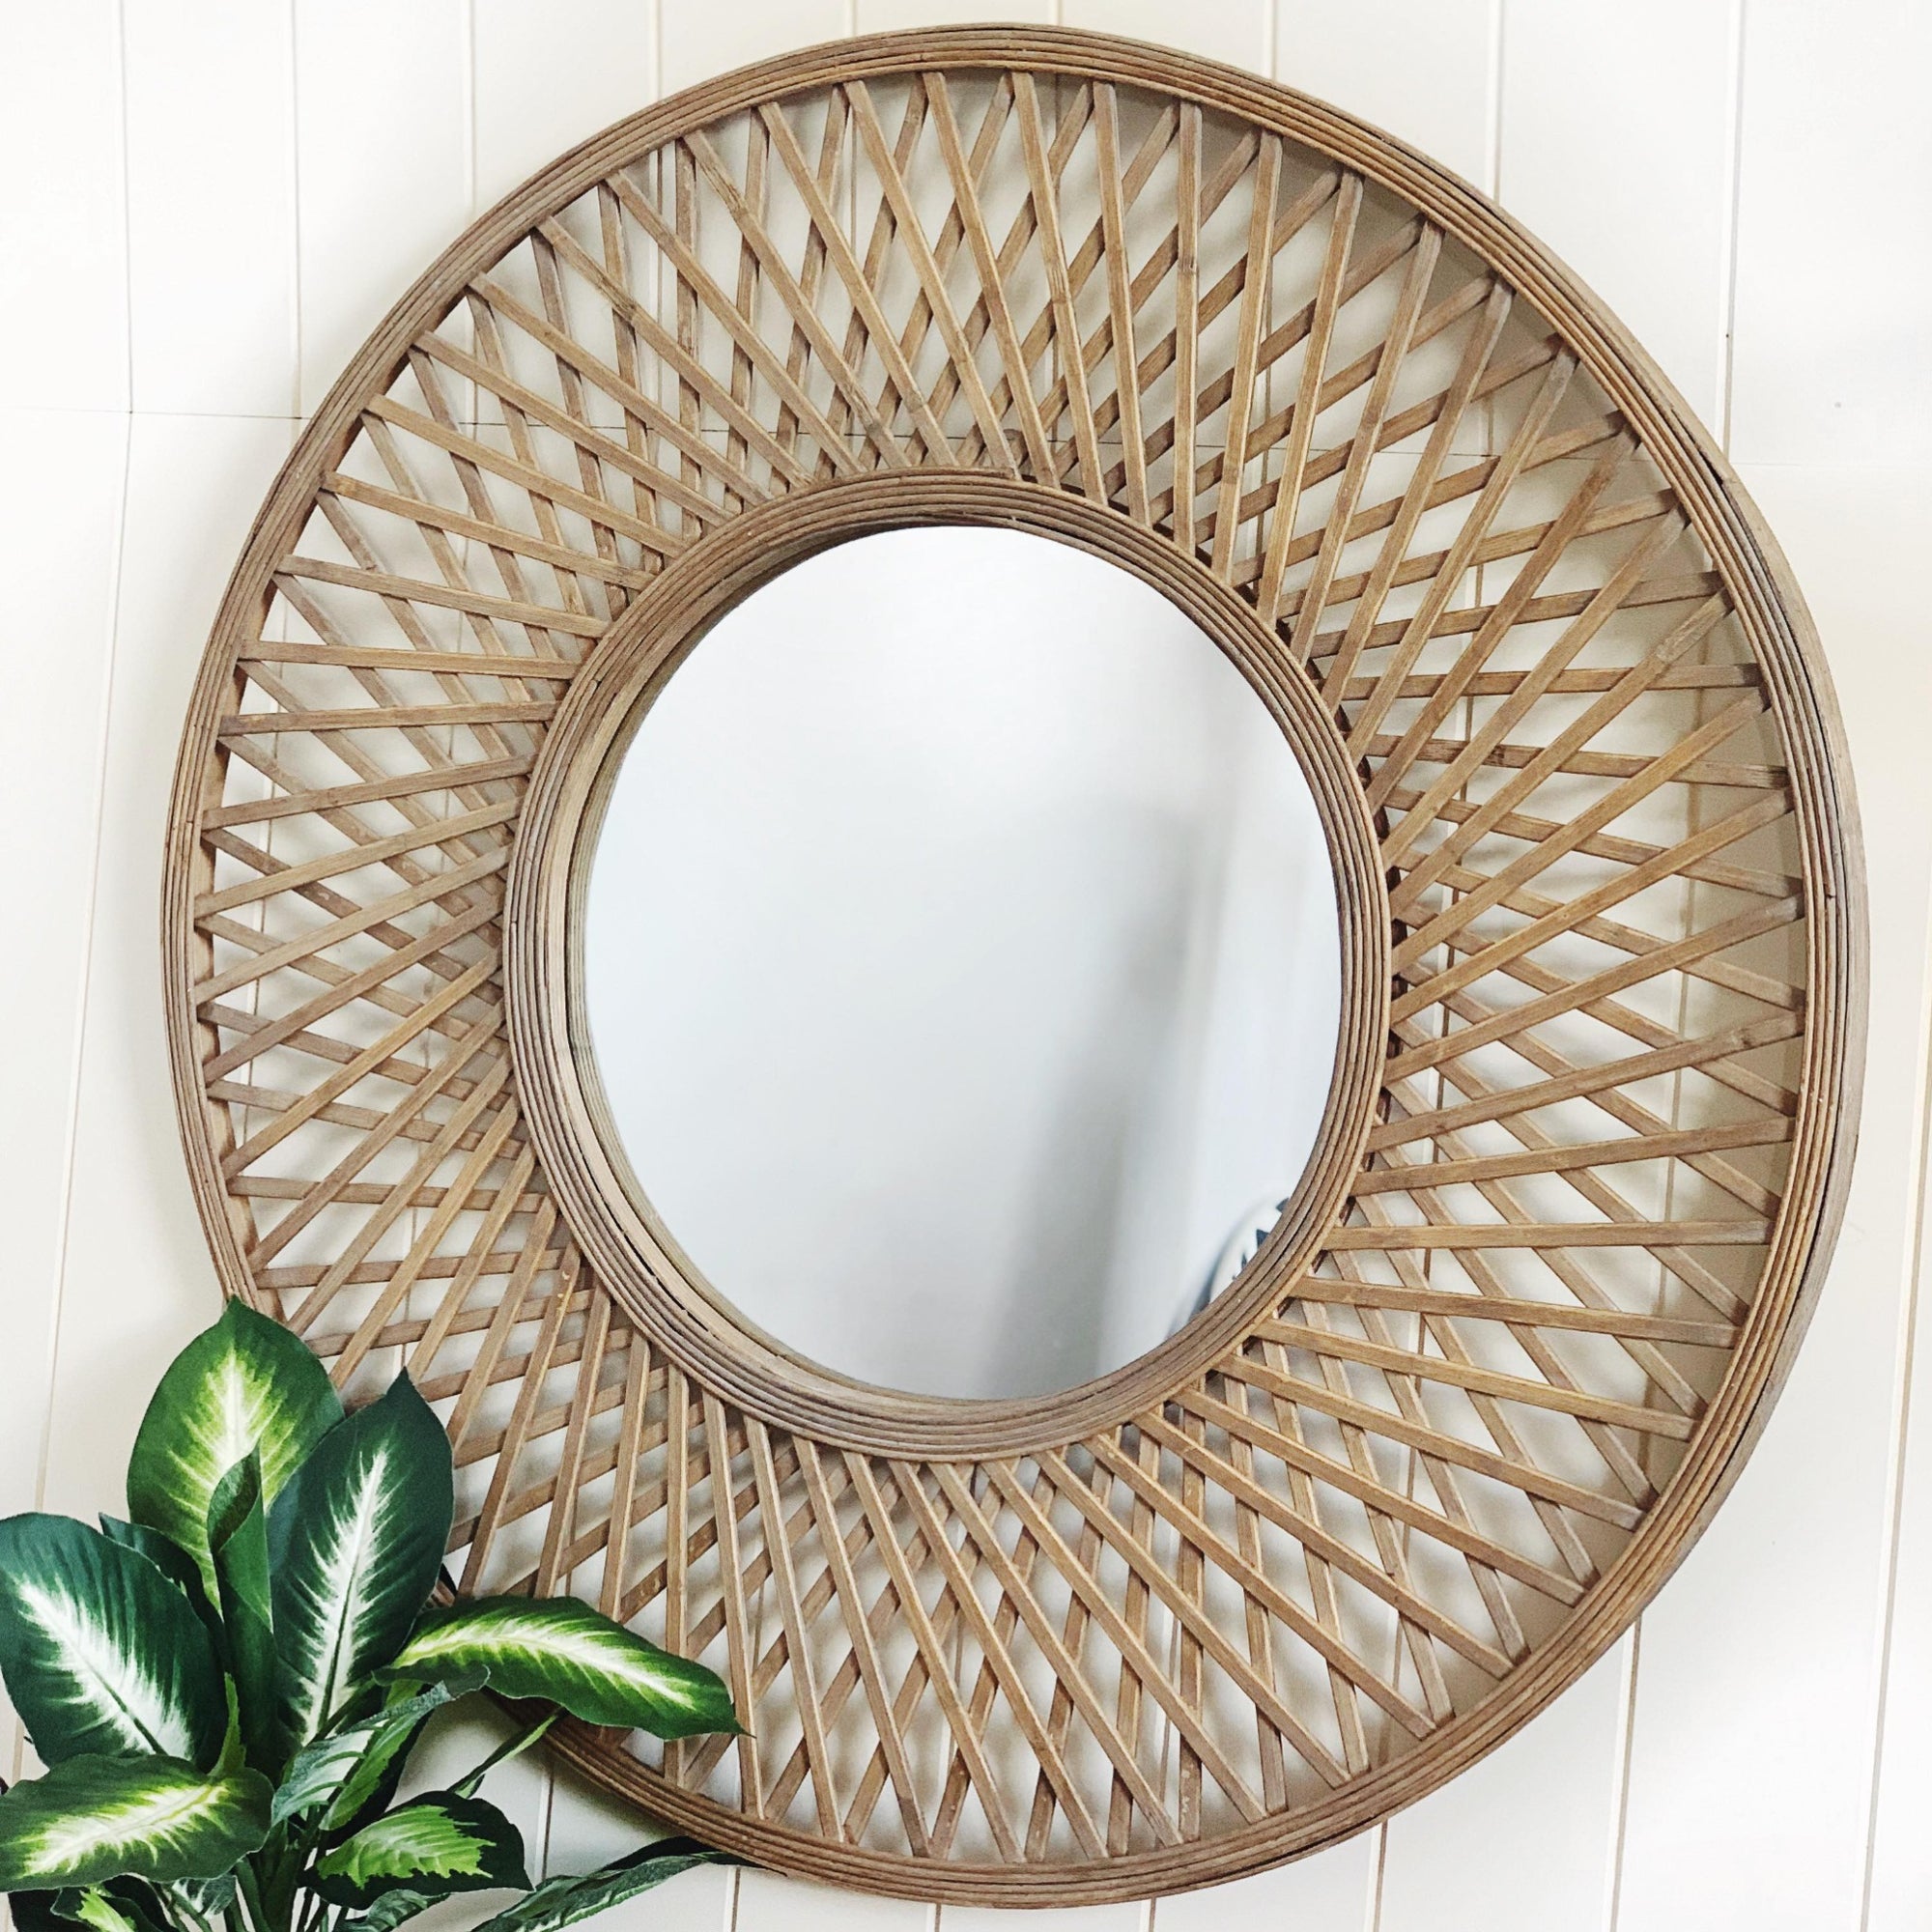 Mirrors - Rattan - Natural Oasis Round Rattan Mirror - 79cm |Bliss Gifts & Homewares - Unit 8, 259 Princes Hwy Ulladulla - Shop Online & In store - 0427795959, 44541523 - Australia wide shipping 